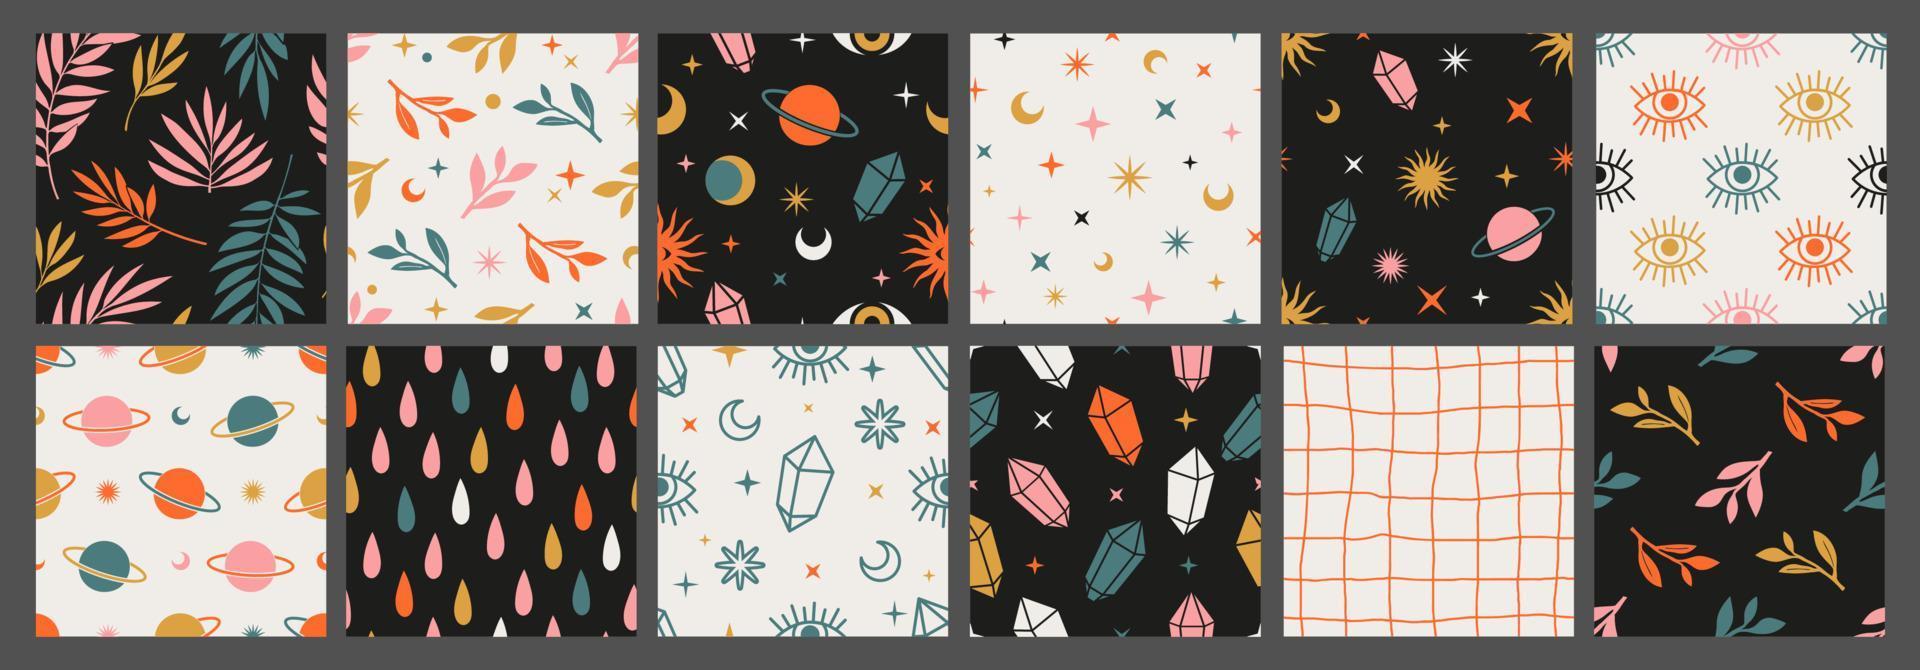 Boho celestial seamless patterns with with constellations, sun, moon, magic eyes, stars, cosmic and floral elements. vector